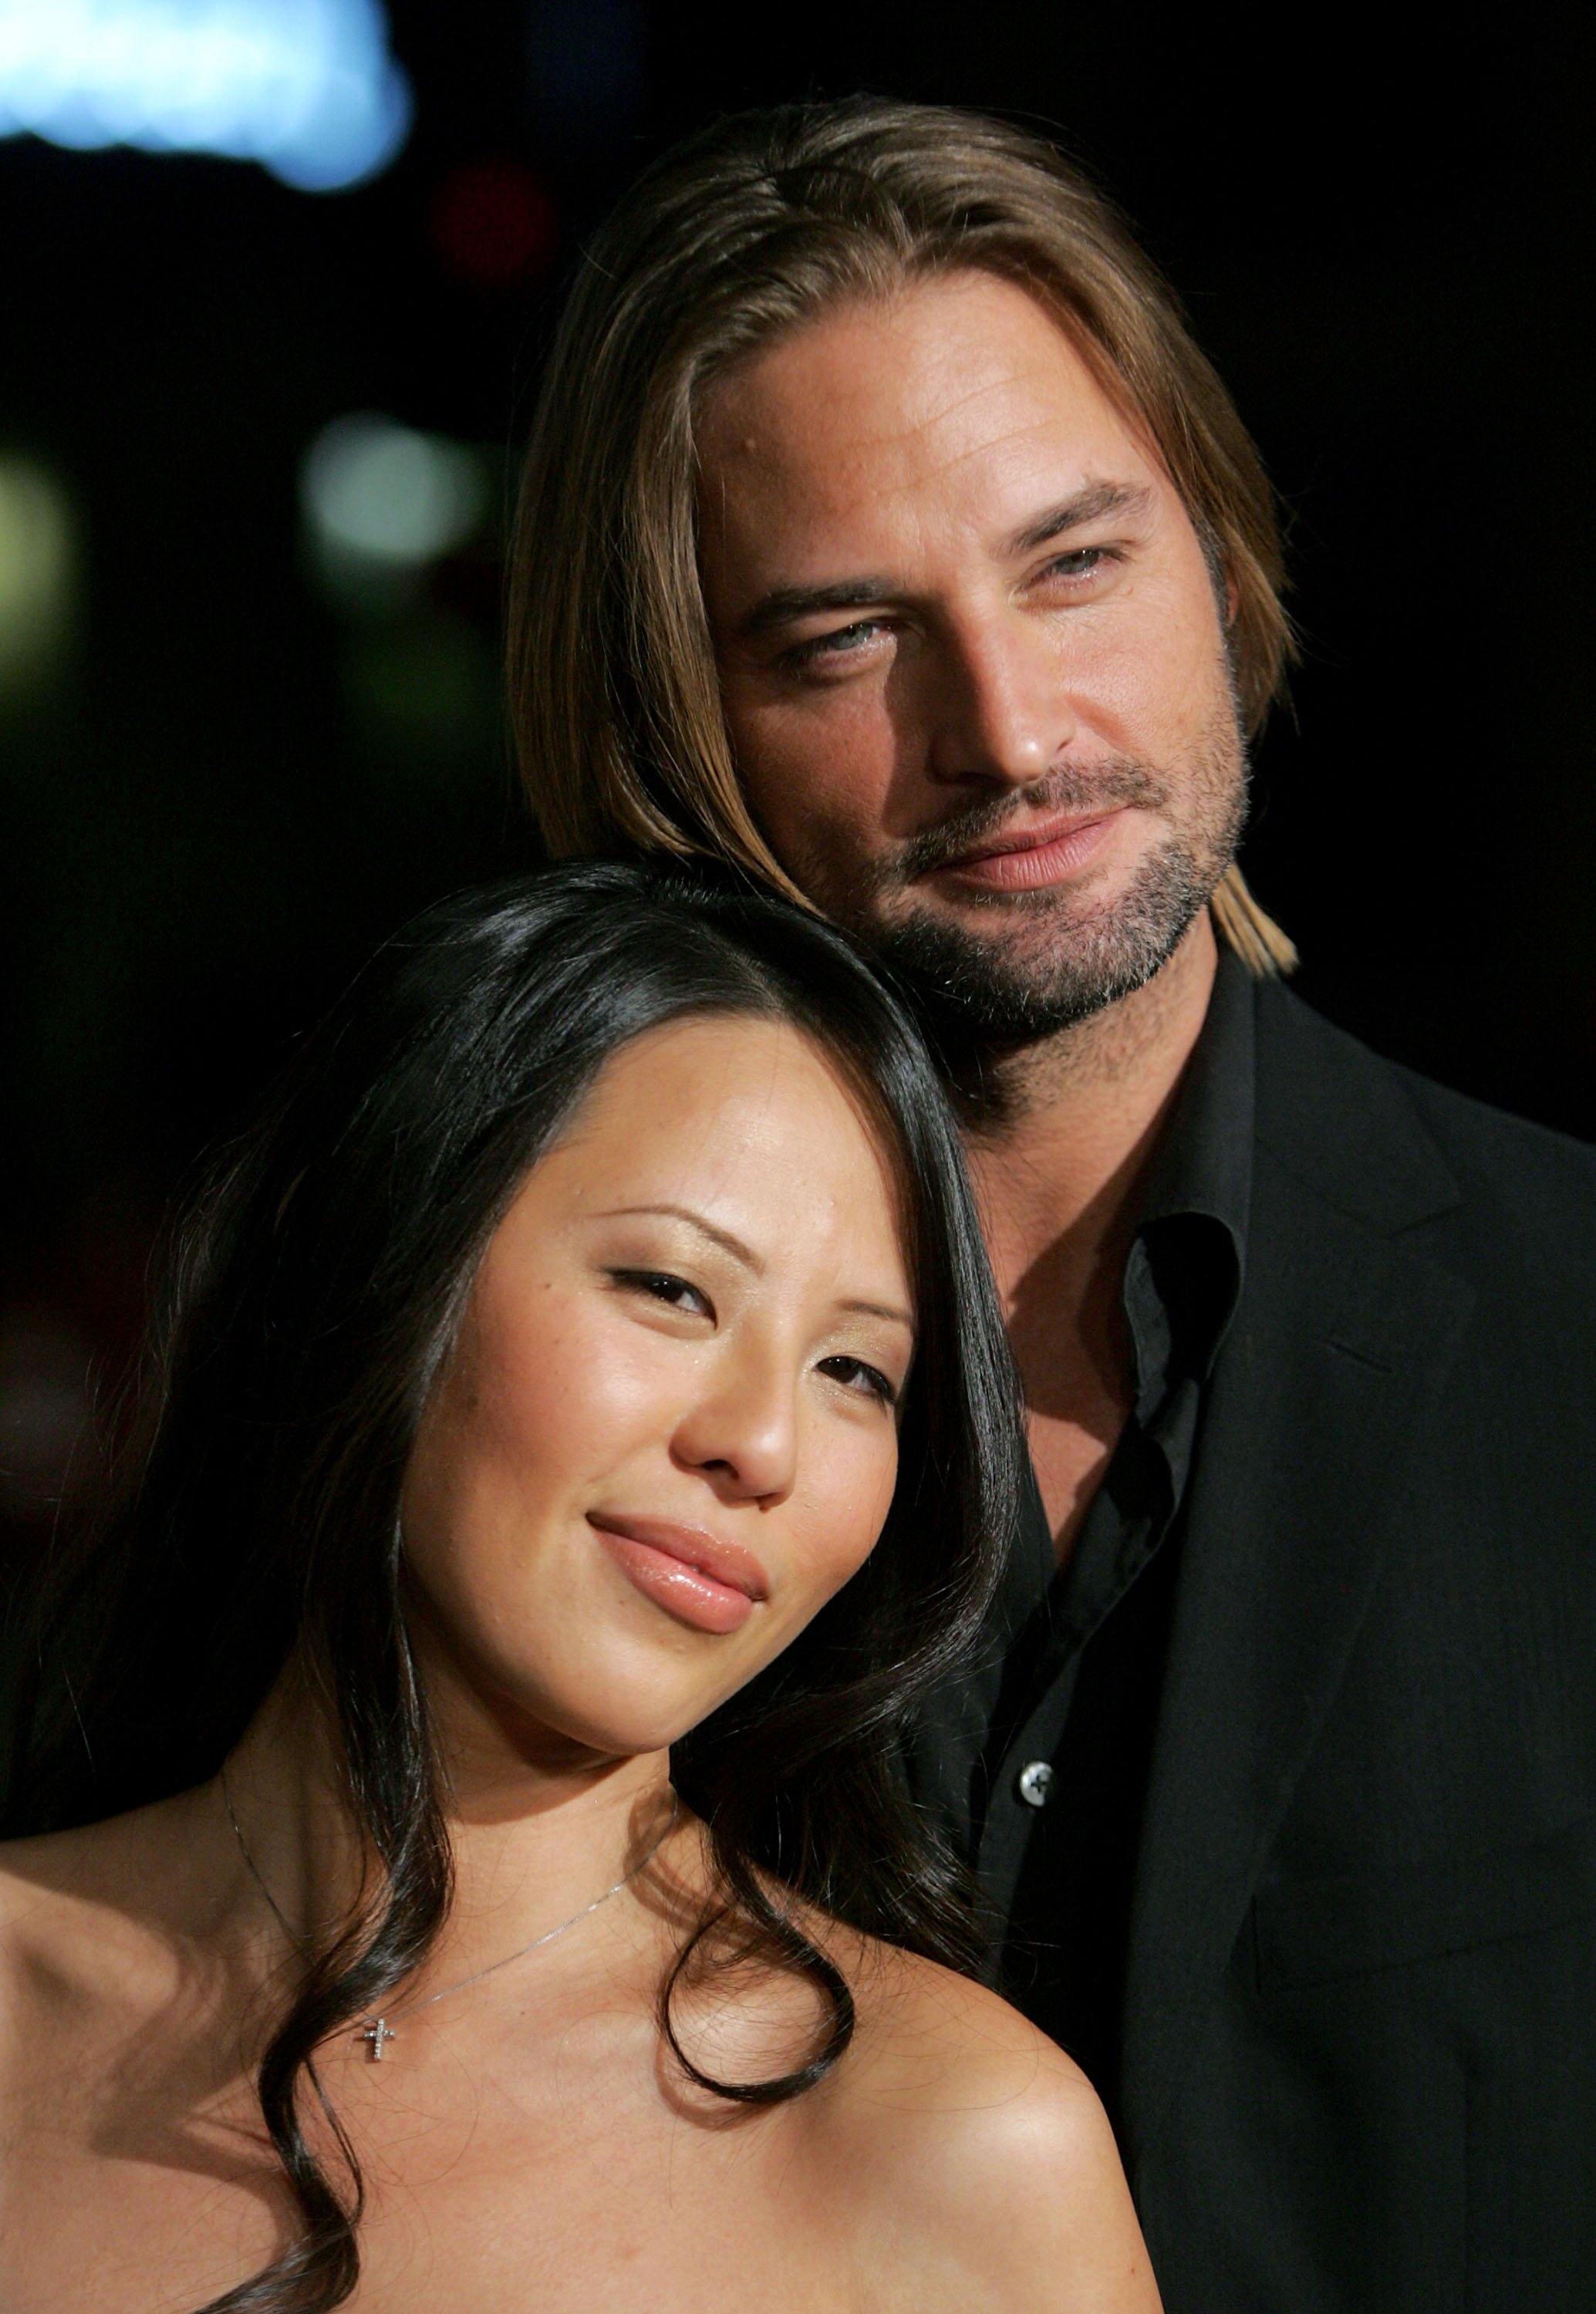 Yessica Kumala and Josh Holloway at the premiere of "We Are Marshall" on December 14, 2006, in Hollywood, California | Source: Getty Images